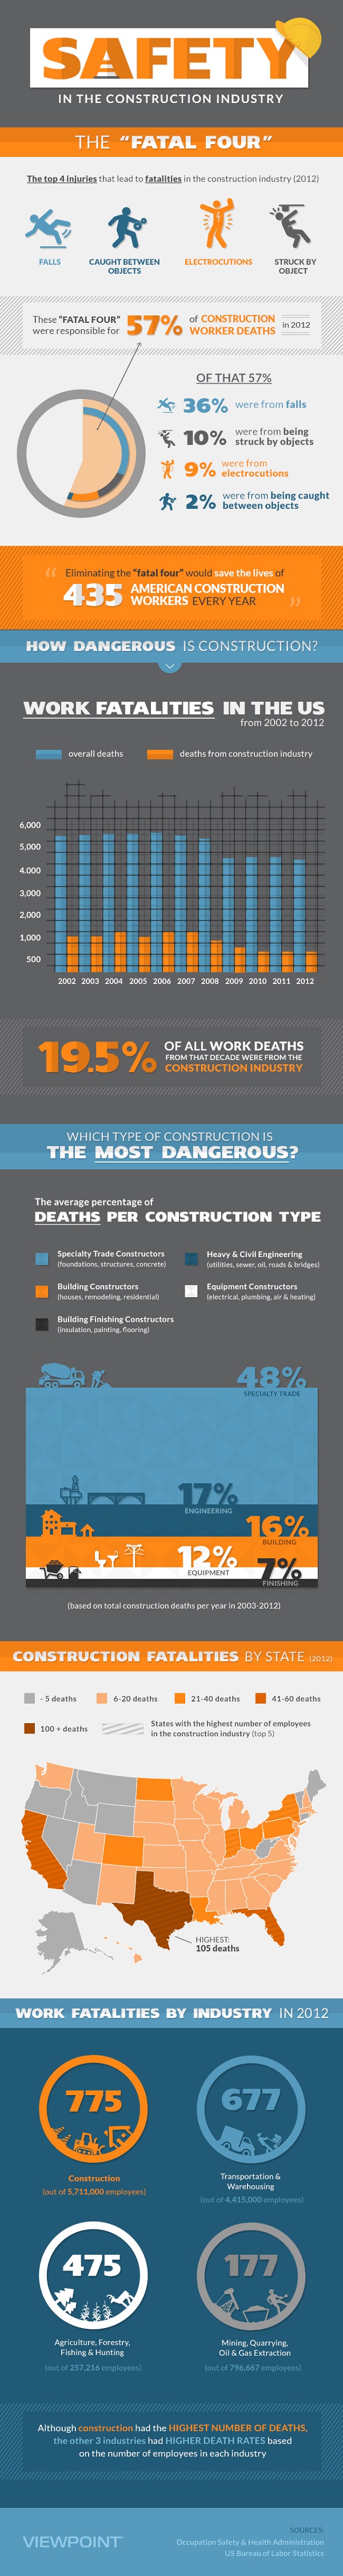 Safety in the Construction Industry